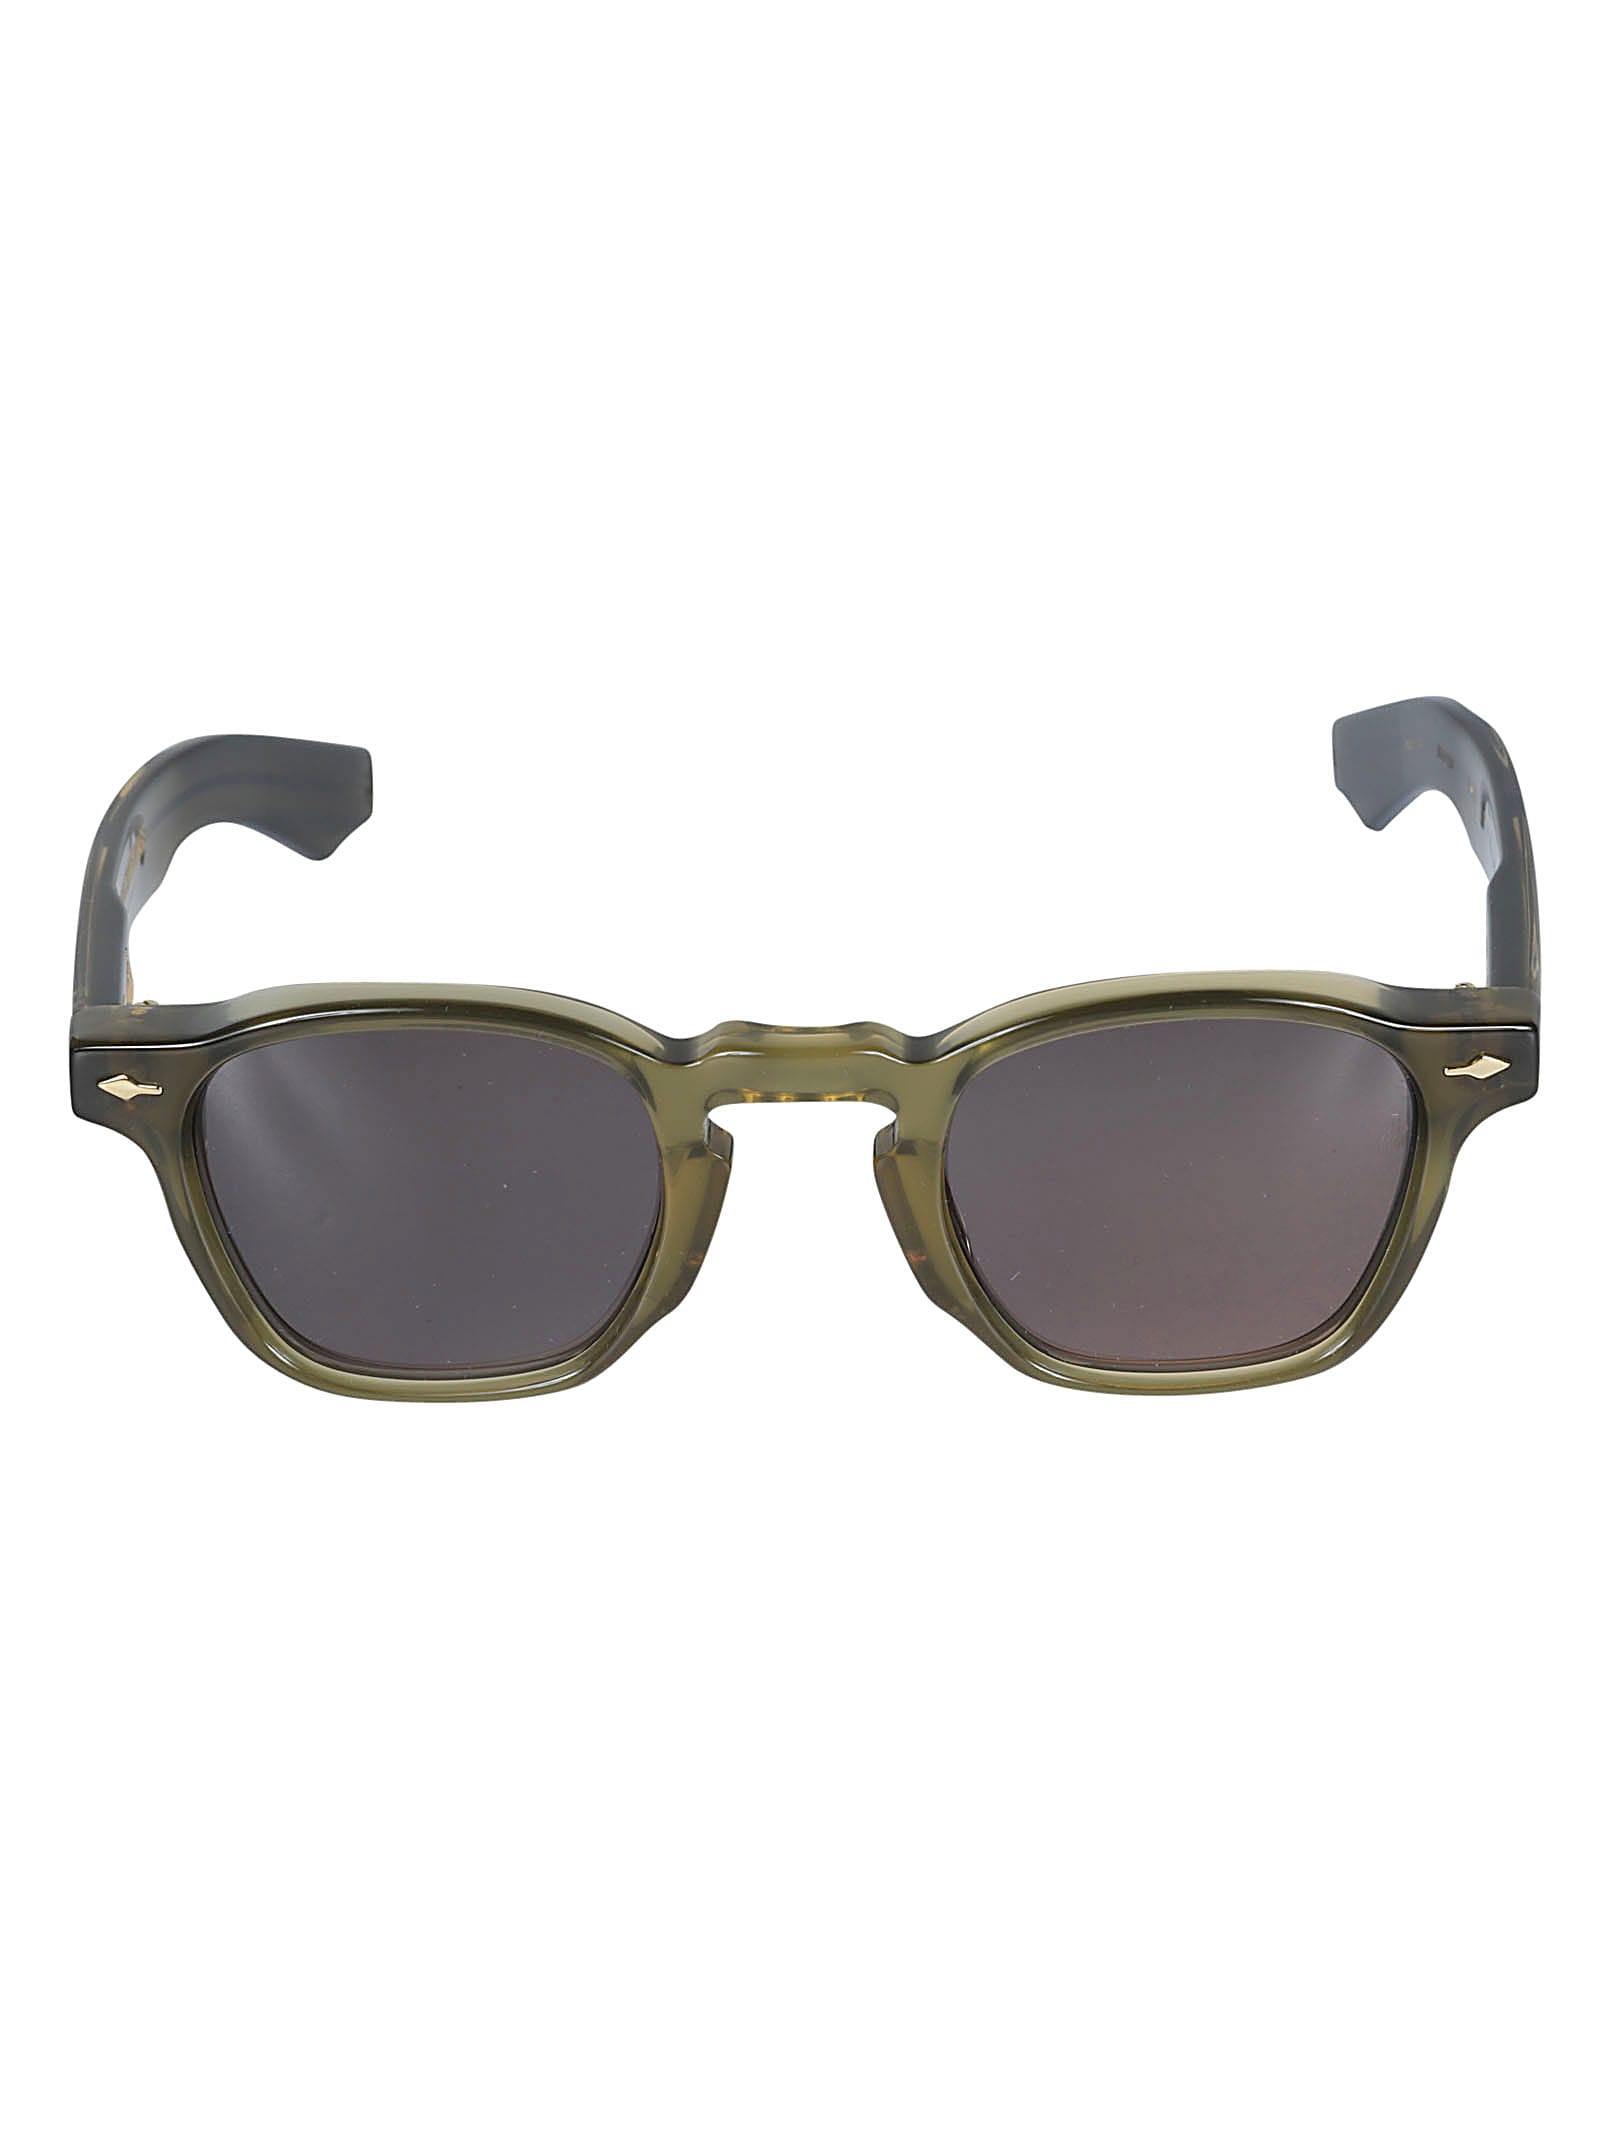 Jacques Marie Mage Classic Sunglasses In Army